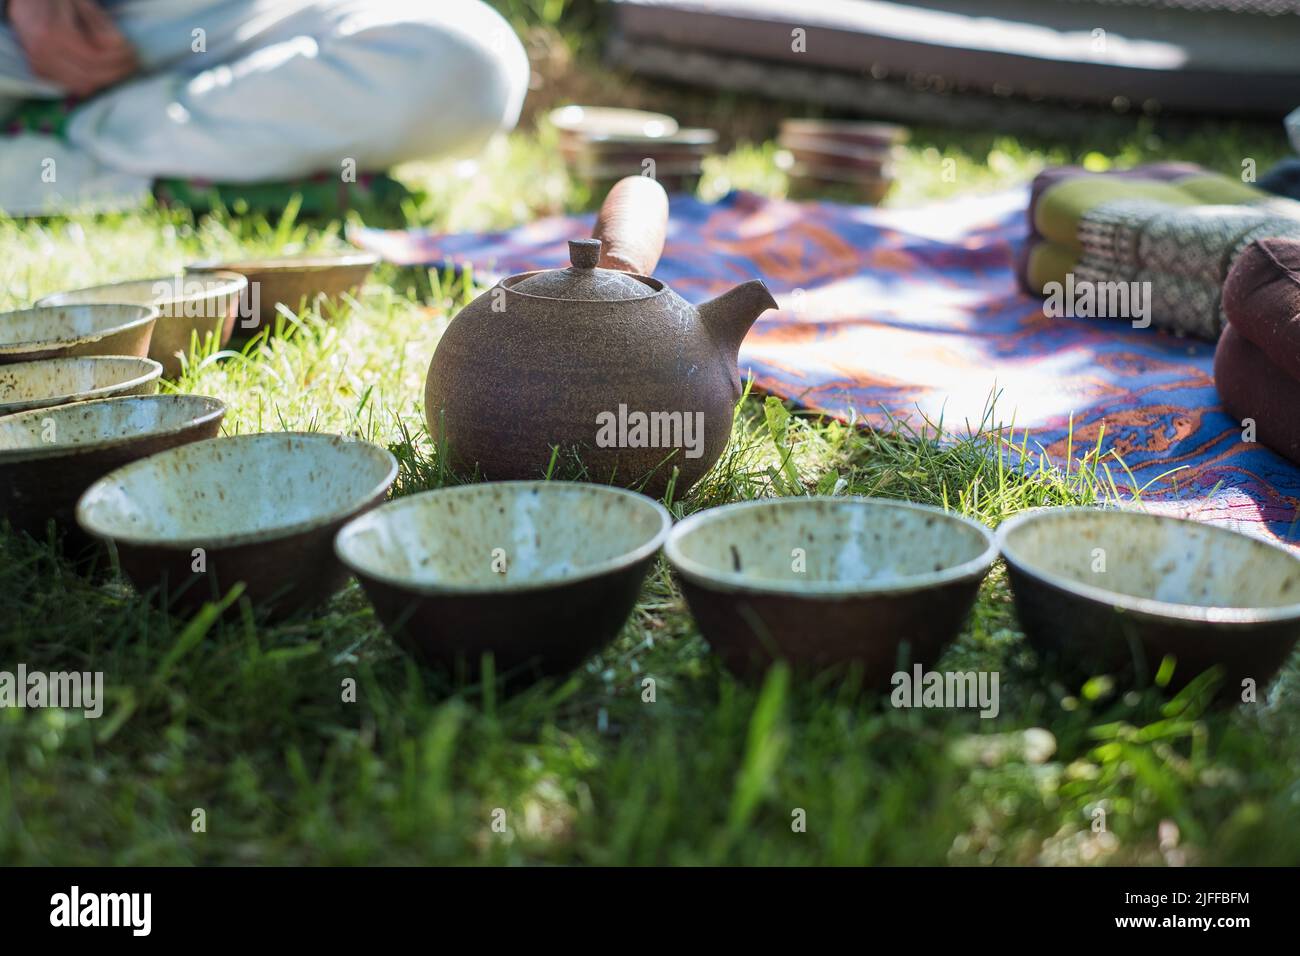 Tea ceremony setting in nature during summer. Handicraft ceramic tea bowls and clay pot. Outdoor tea circle. Calm and relaxing meditation tradition. Stock Photo